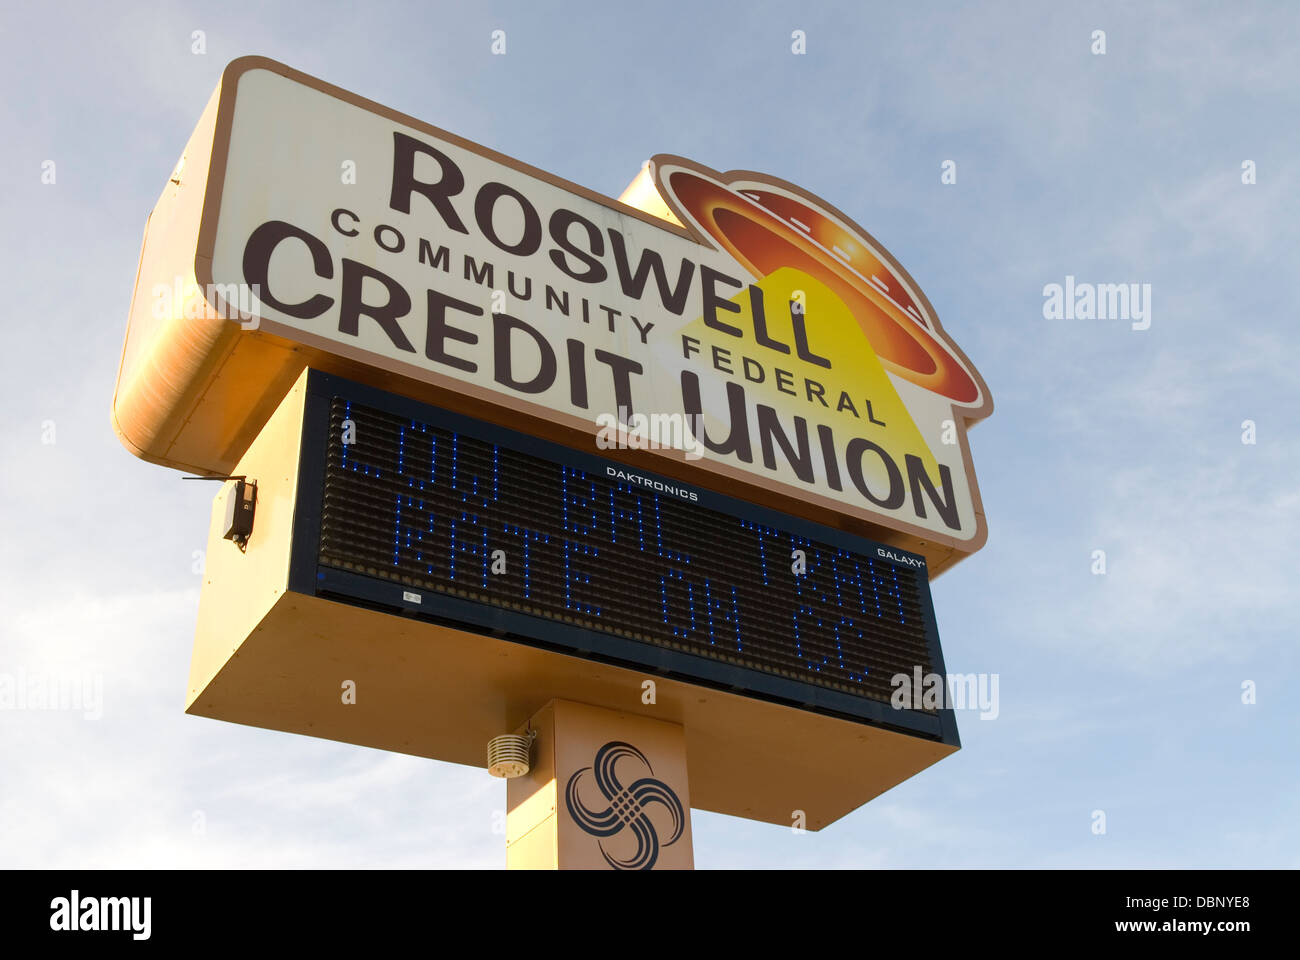 Roswell Community Federal Credit Union Zeichen New Mexico USA. Stockfoto